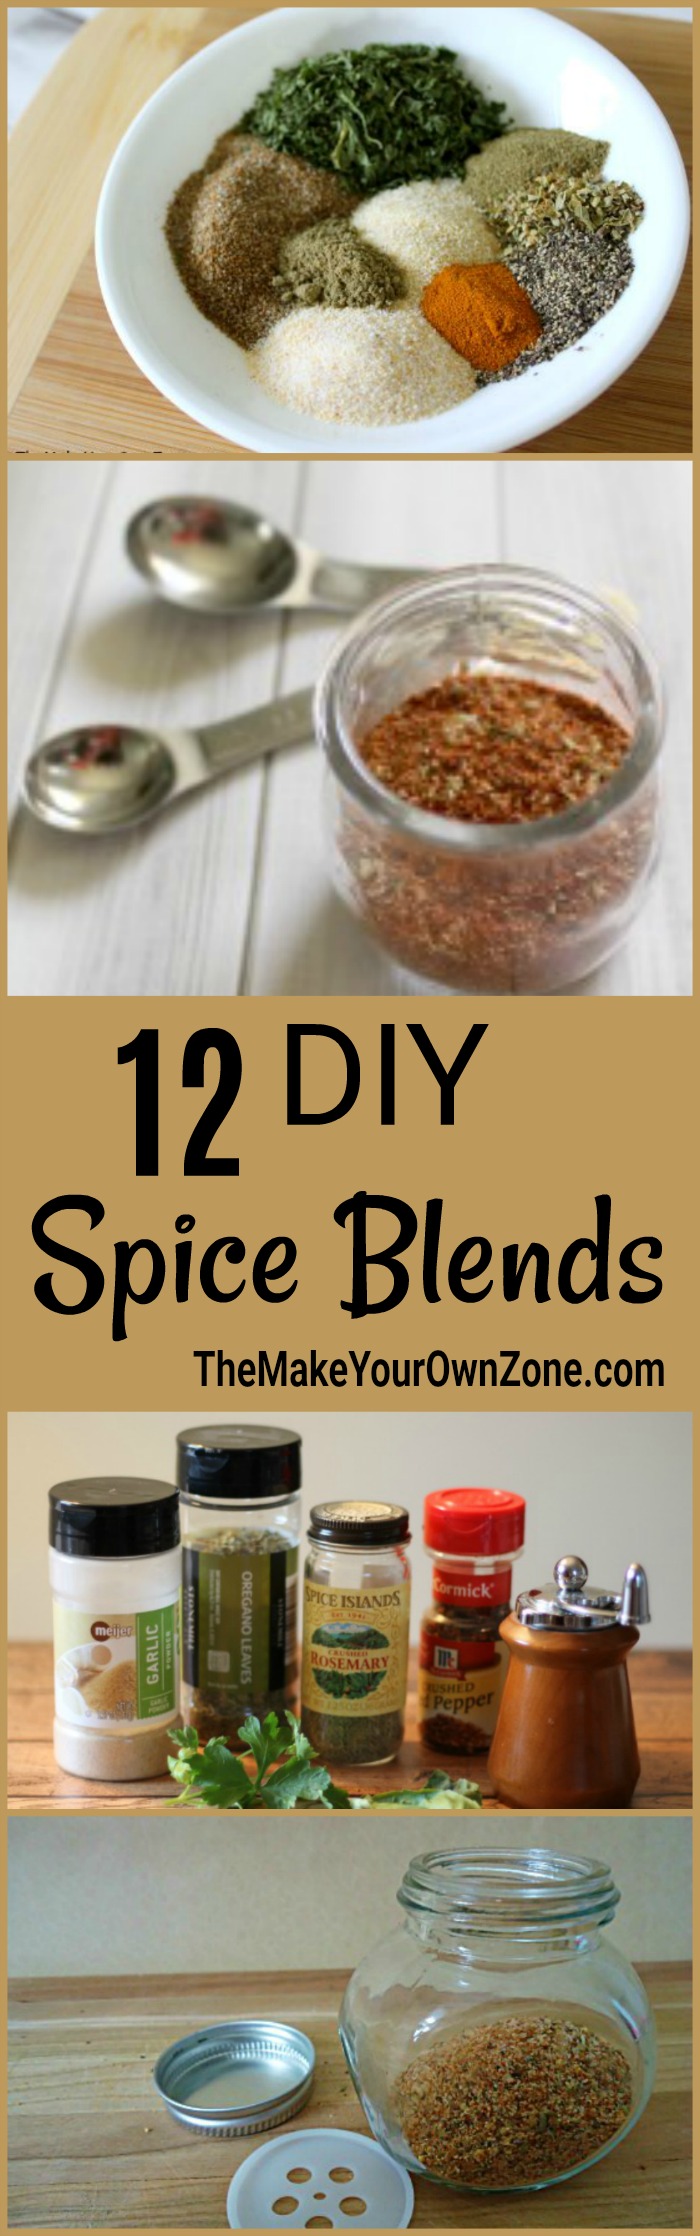 12 Recipes to make your own spice mixes - a dozen ways to create your own seasoning blends!